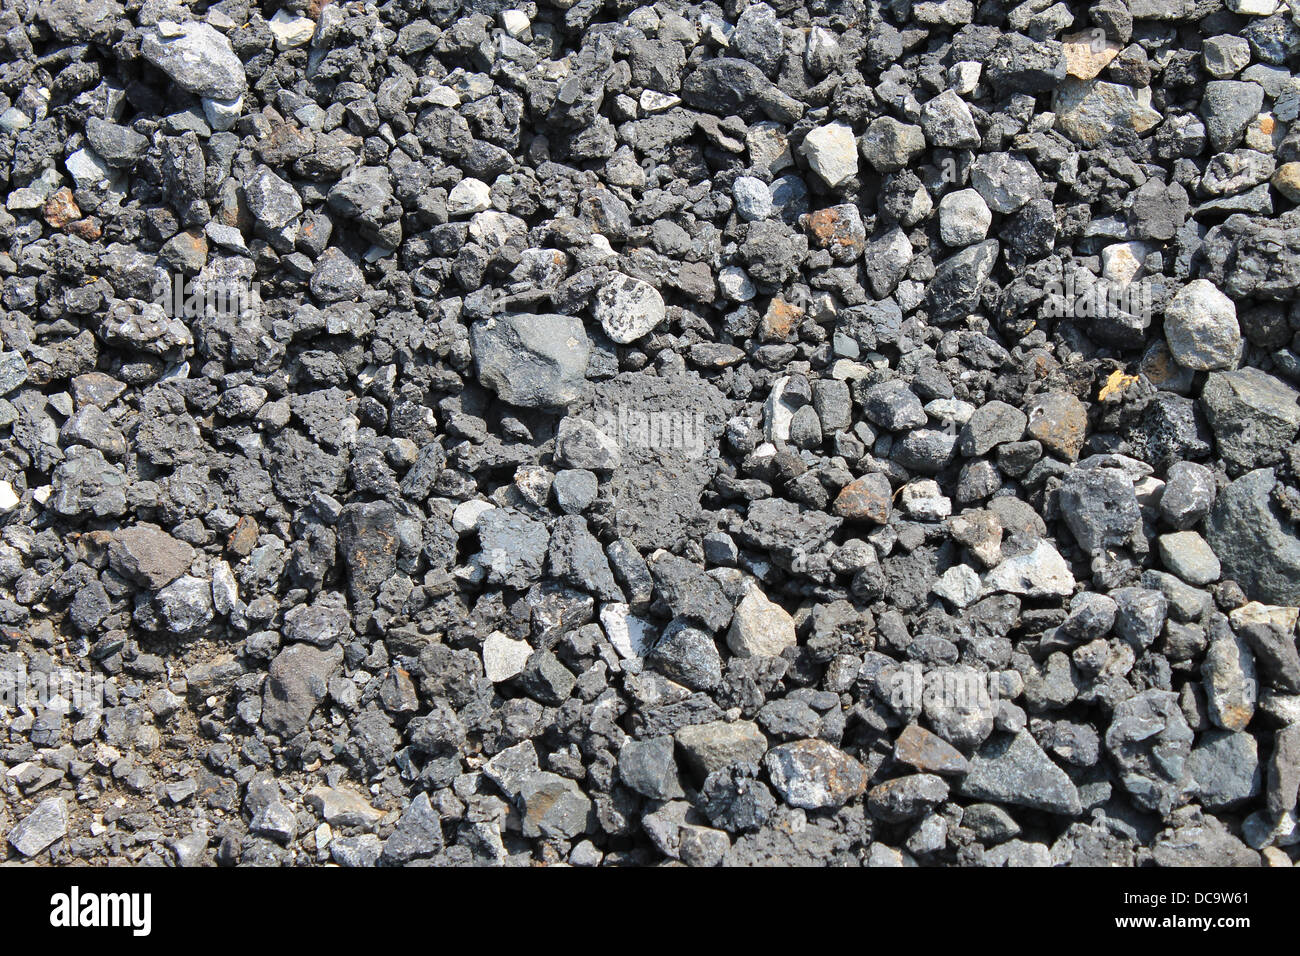 Abstract background of crushed black coal. Stock Photo